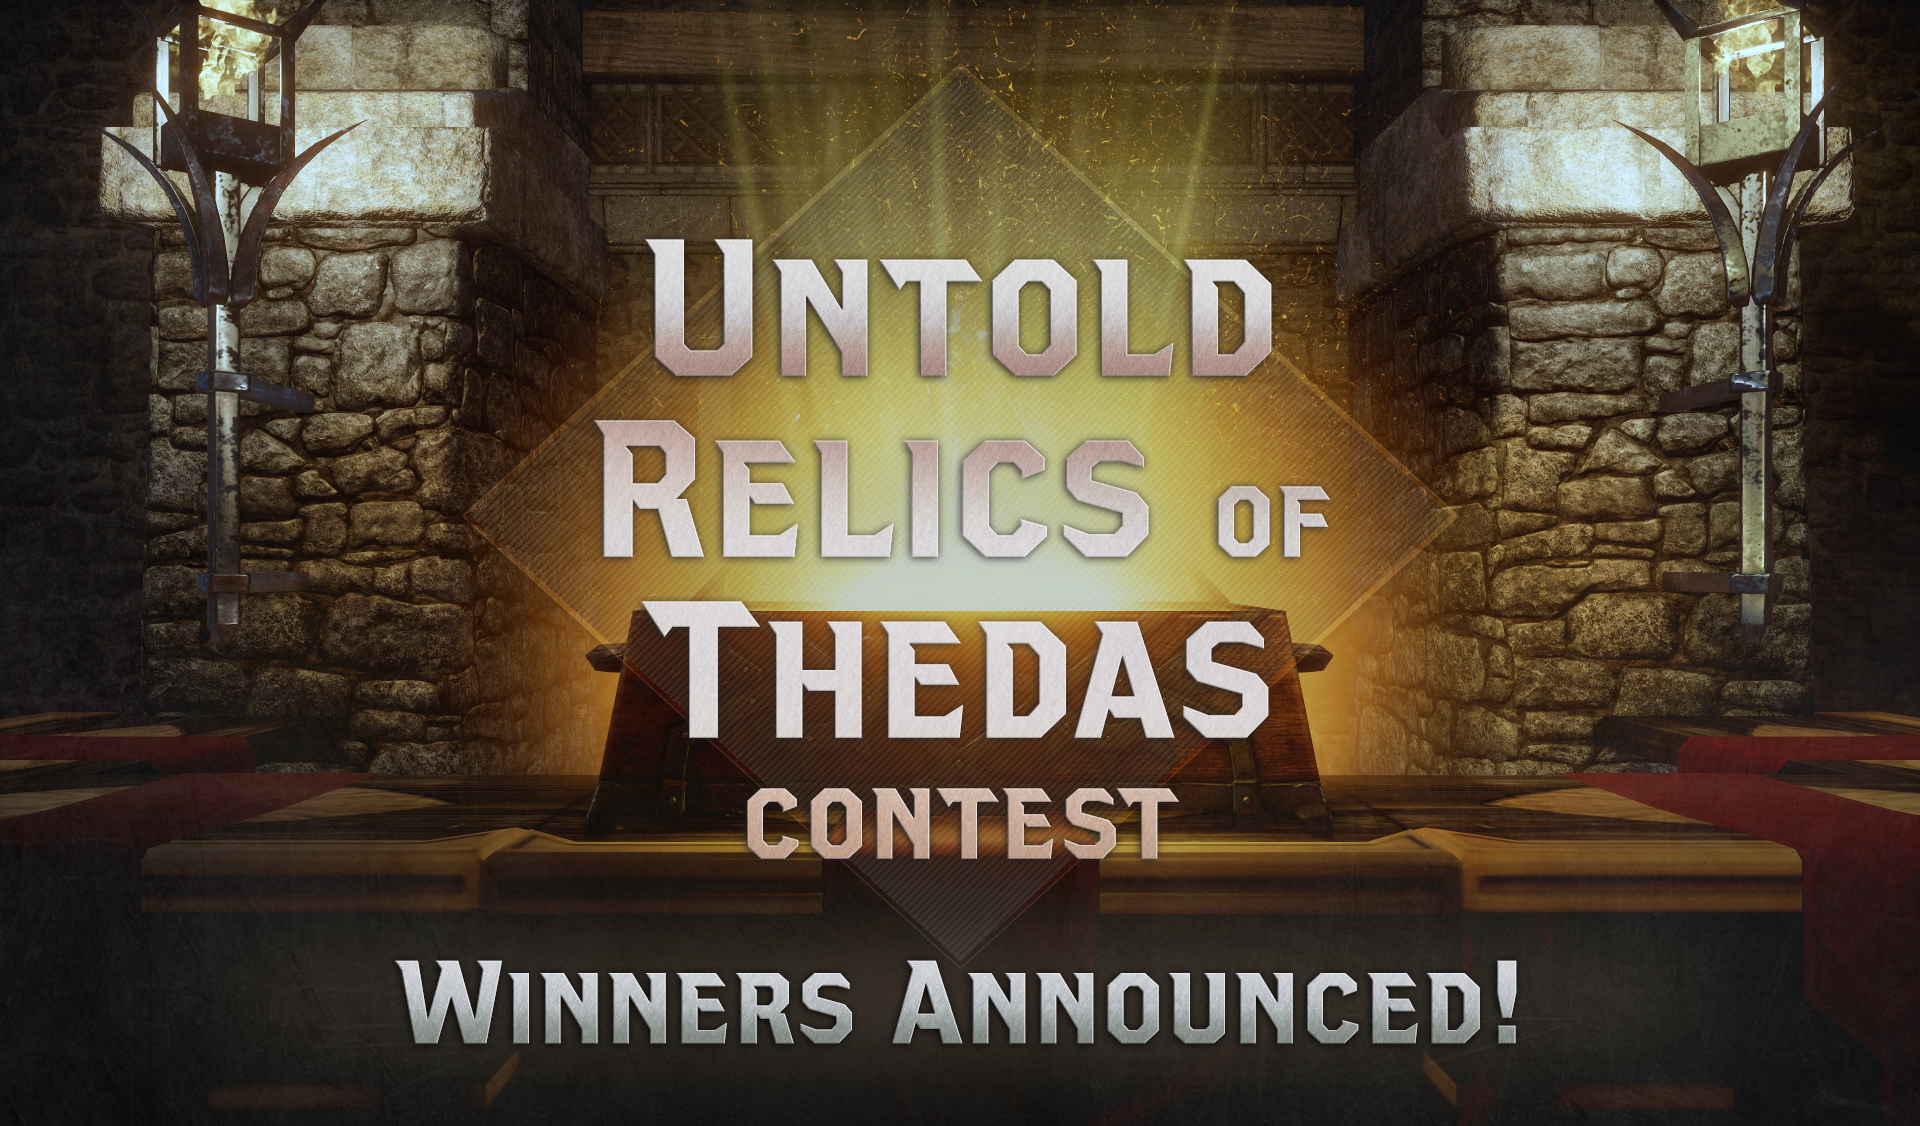 Untold Relics of Thedas Contest Winners